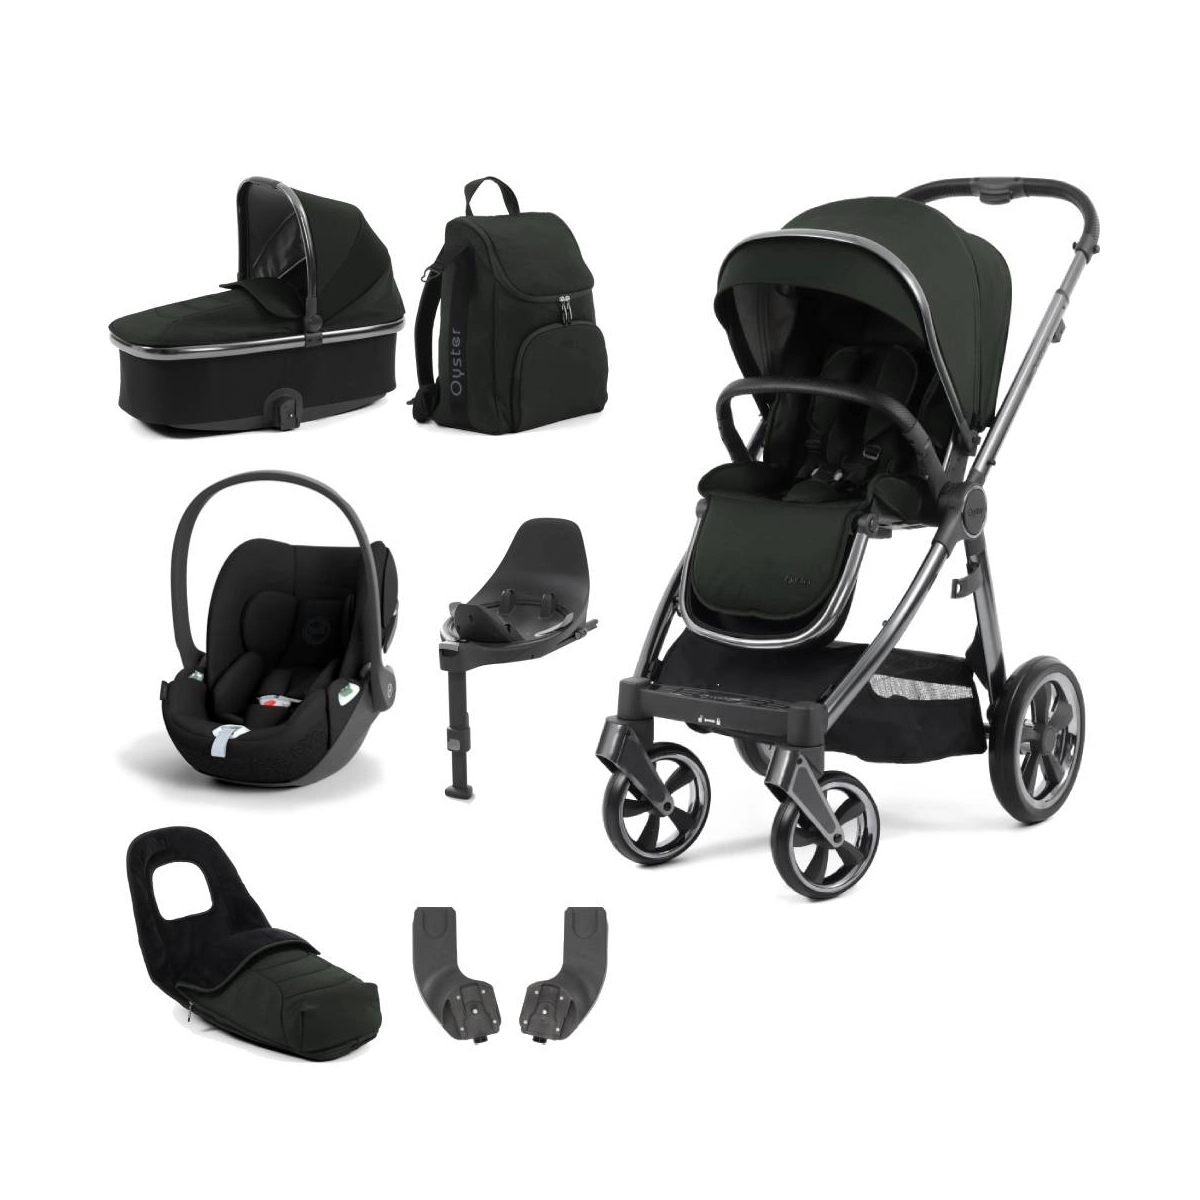 BabyStyle Oyster 3 Gun Metal Chassis Luxury 7 Piece Bundle with Cybex Cloud T Car Seat & Base